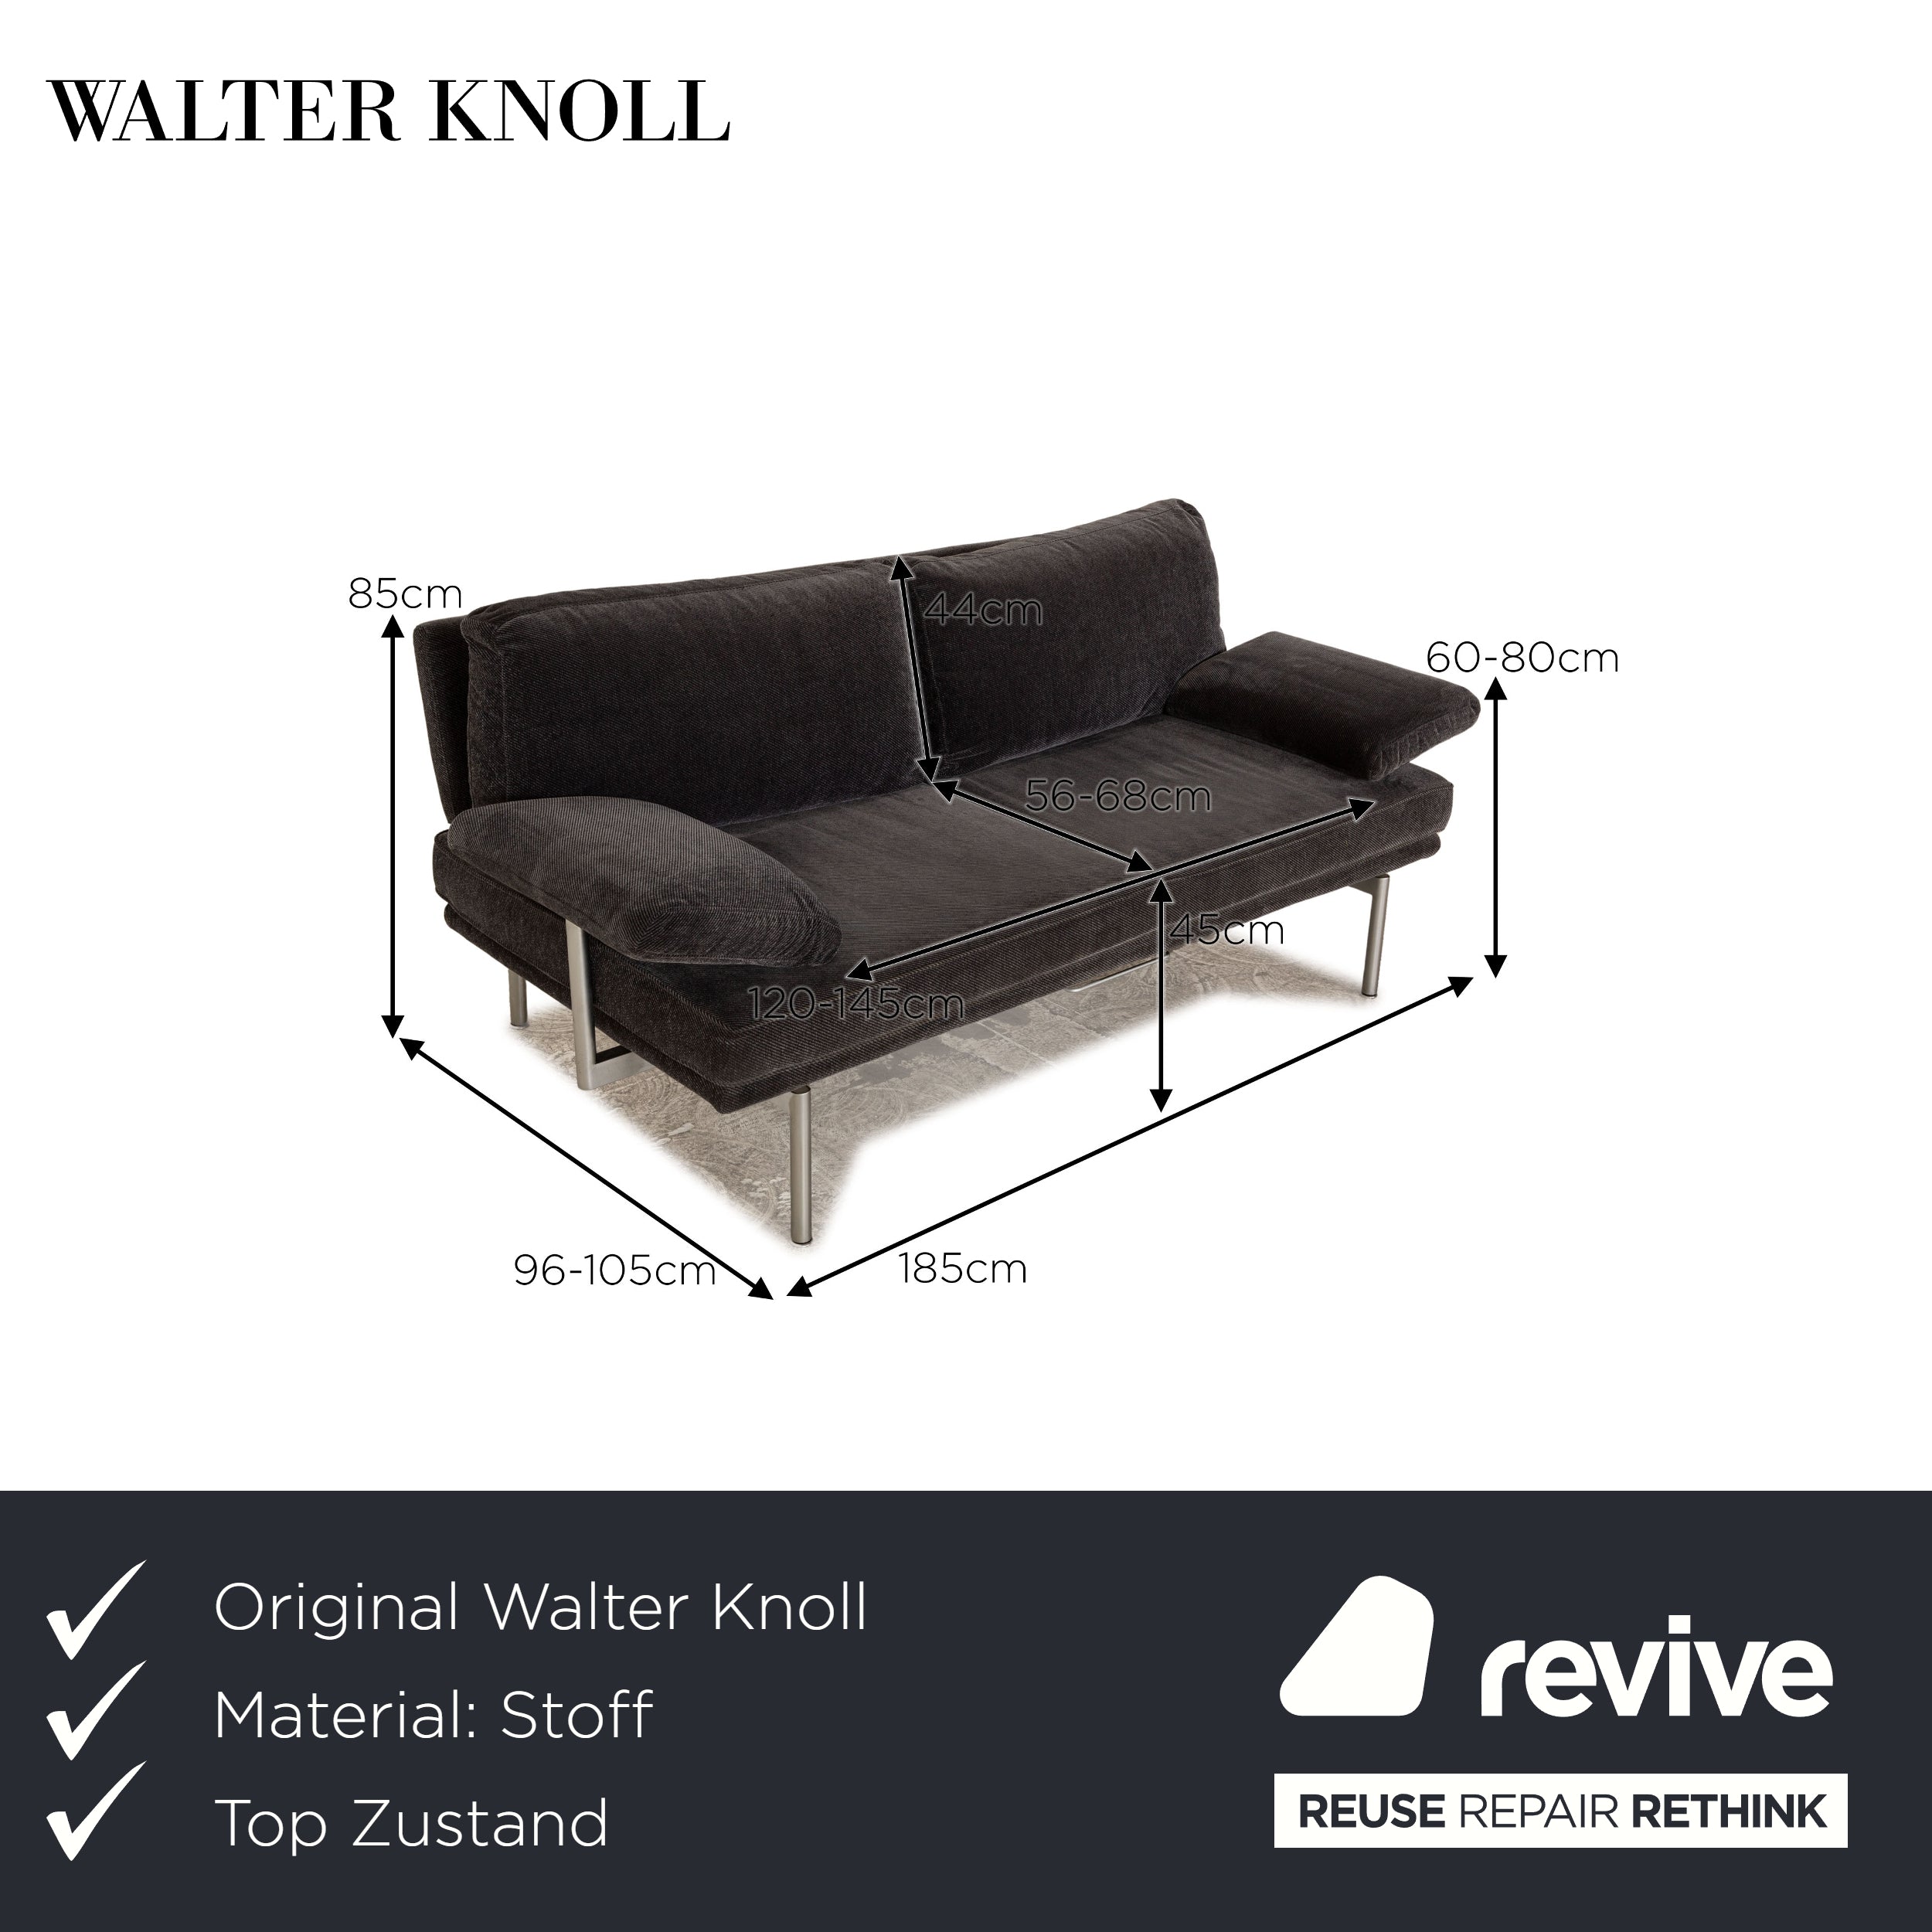 Walter Knoll Living Platform fabric two-seater gray manual function